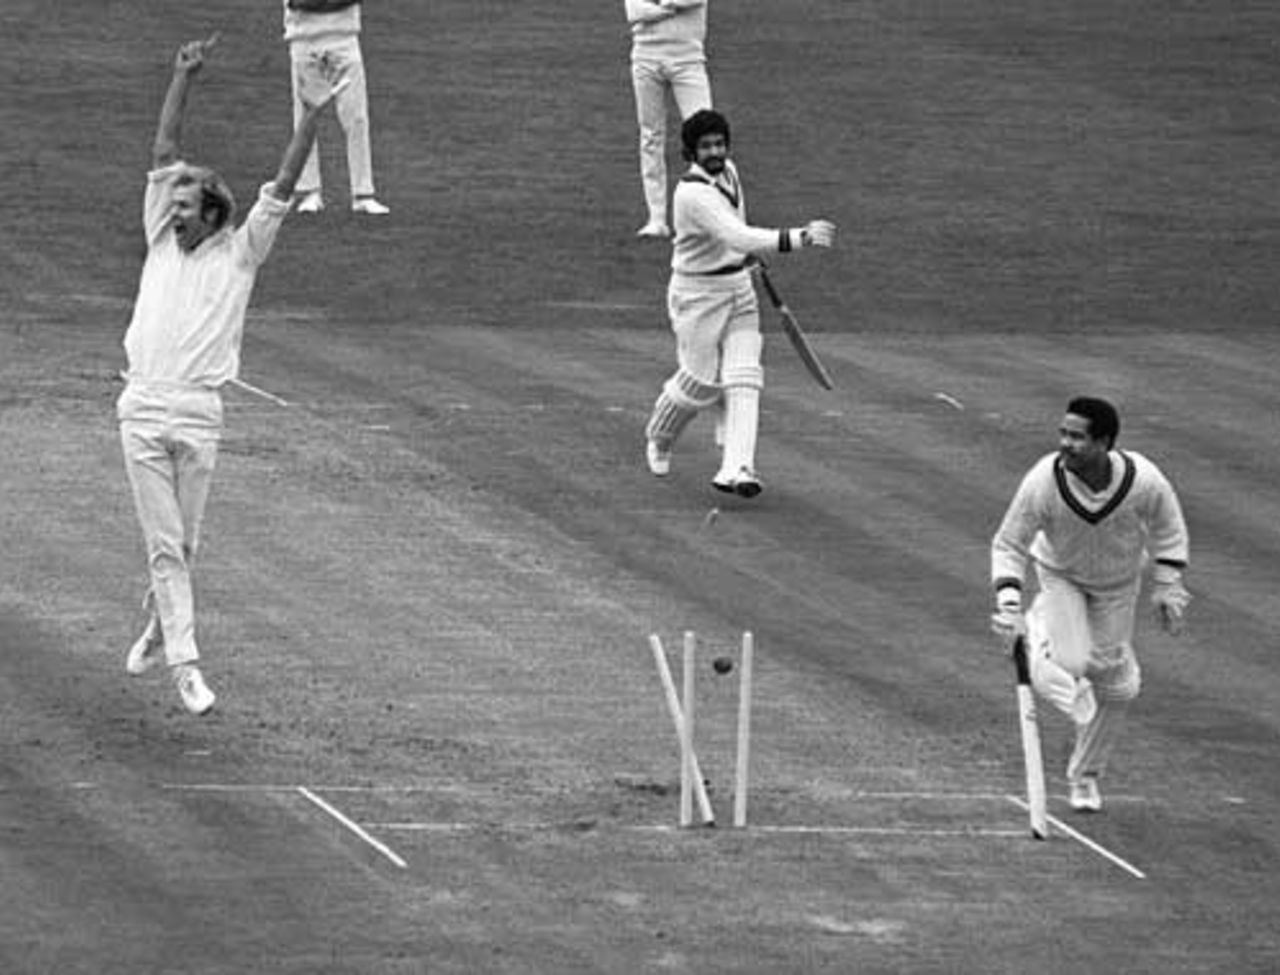 Tony Greig gets Garry Sobers run out at The Oval, in 1973